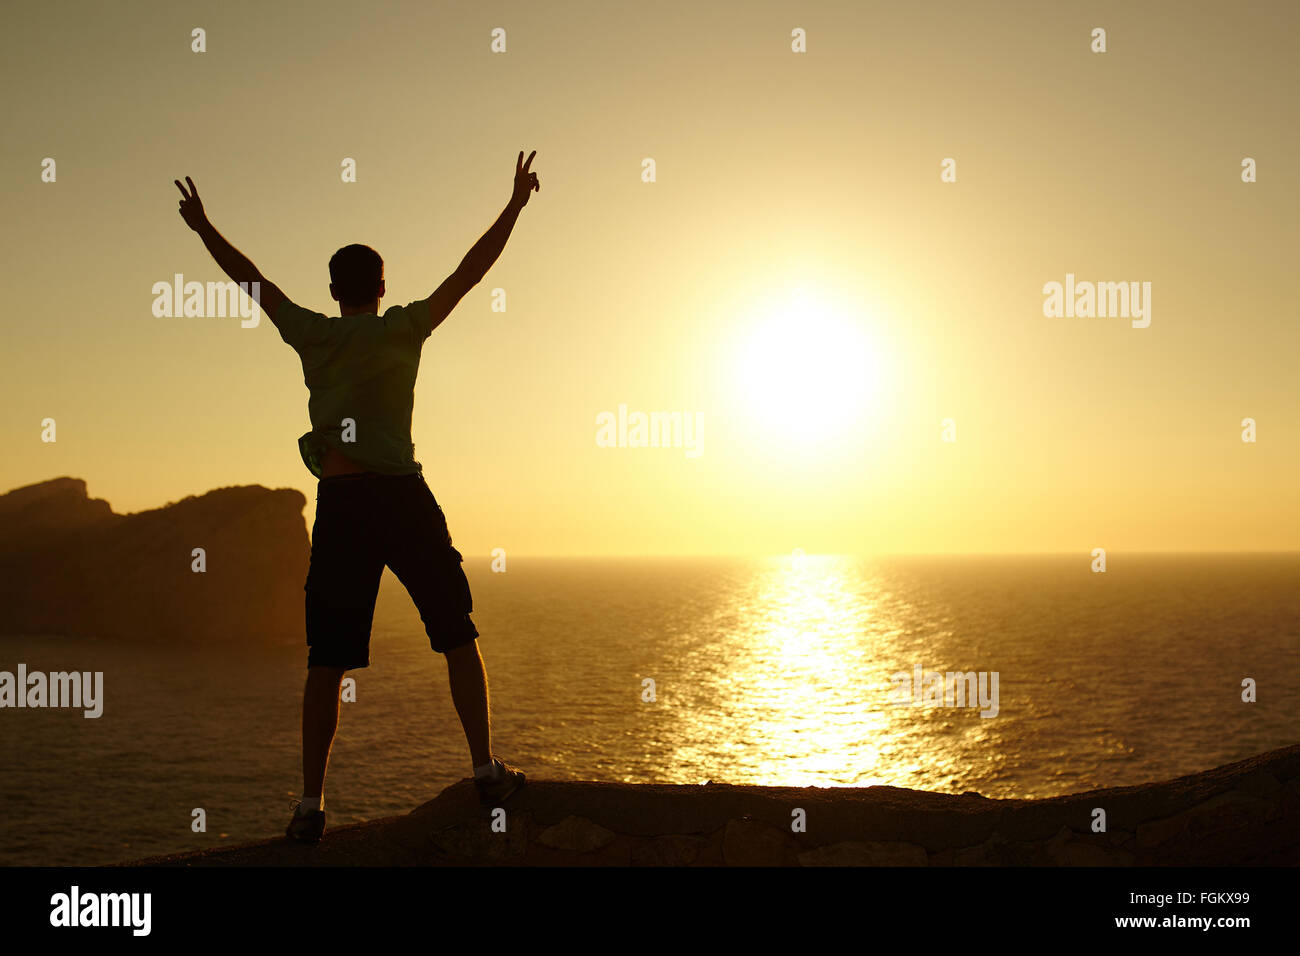 Silhouette of a man with raised arms Stock Photo